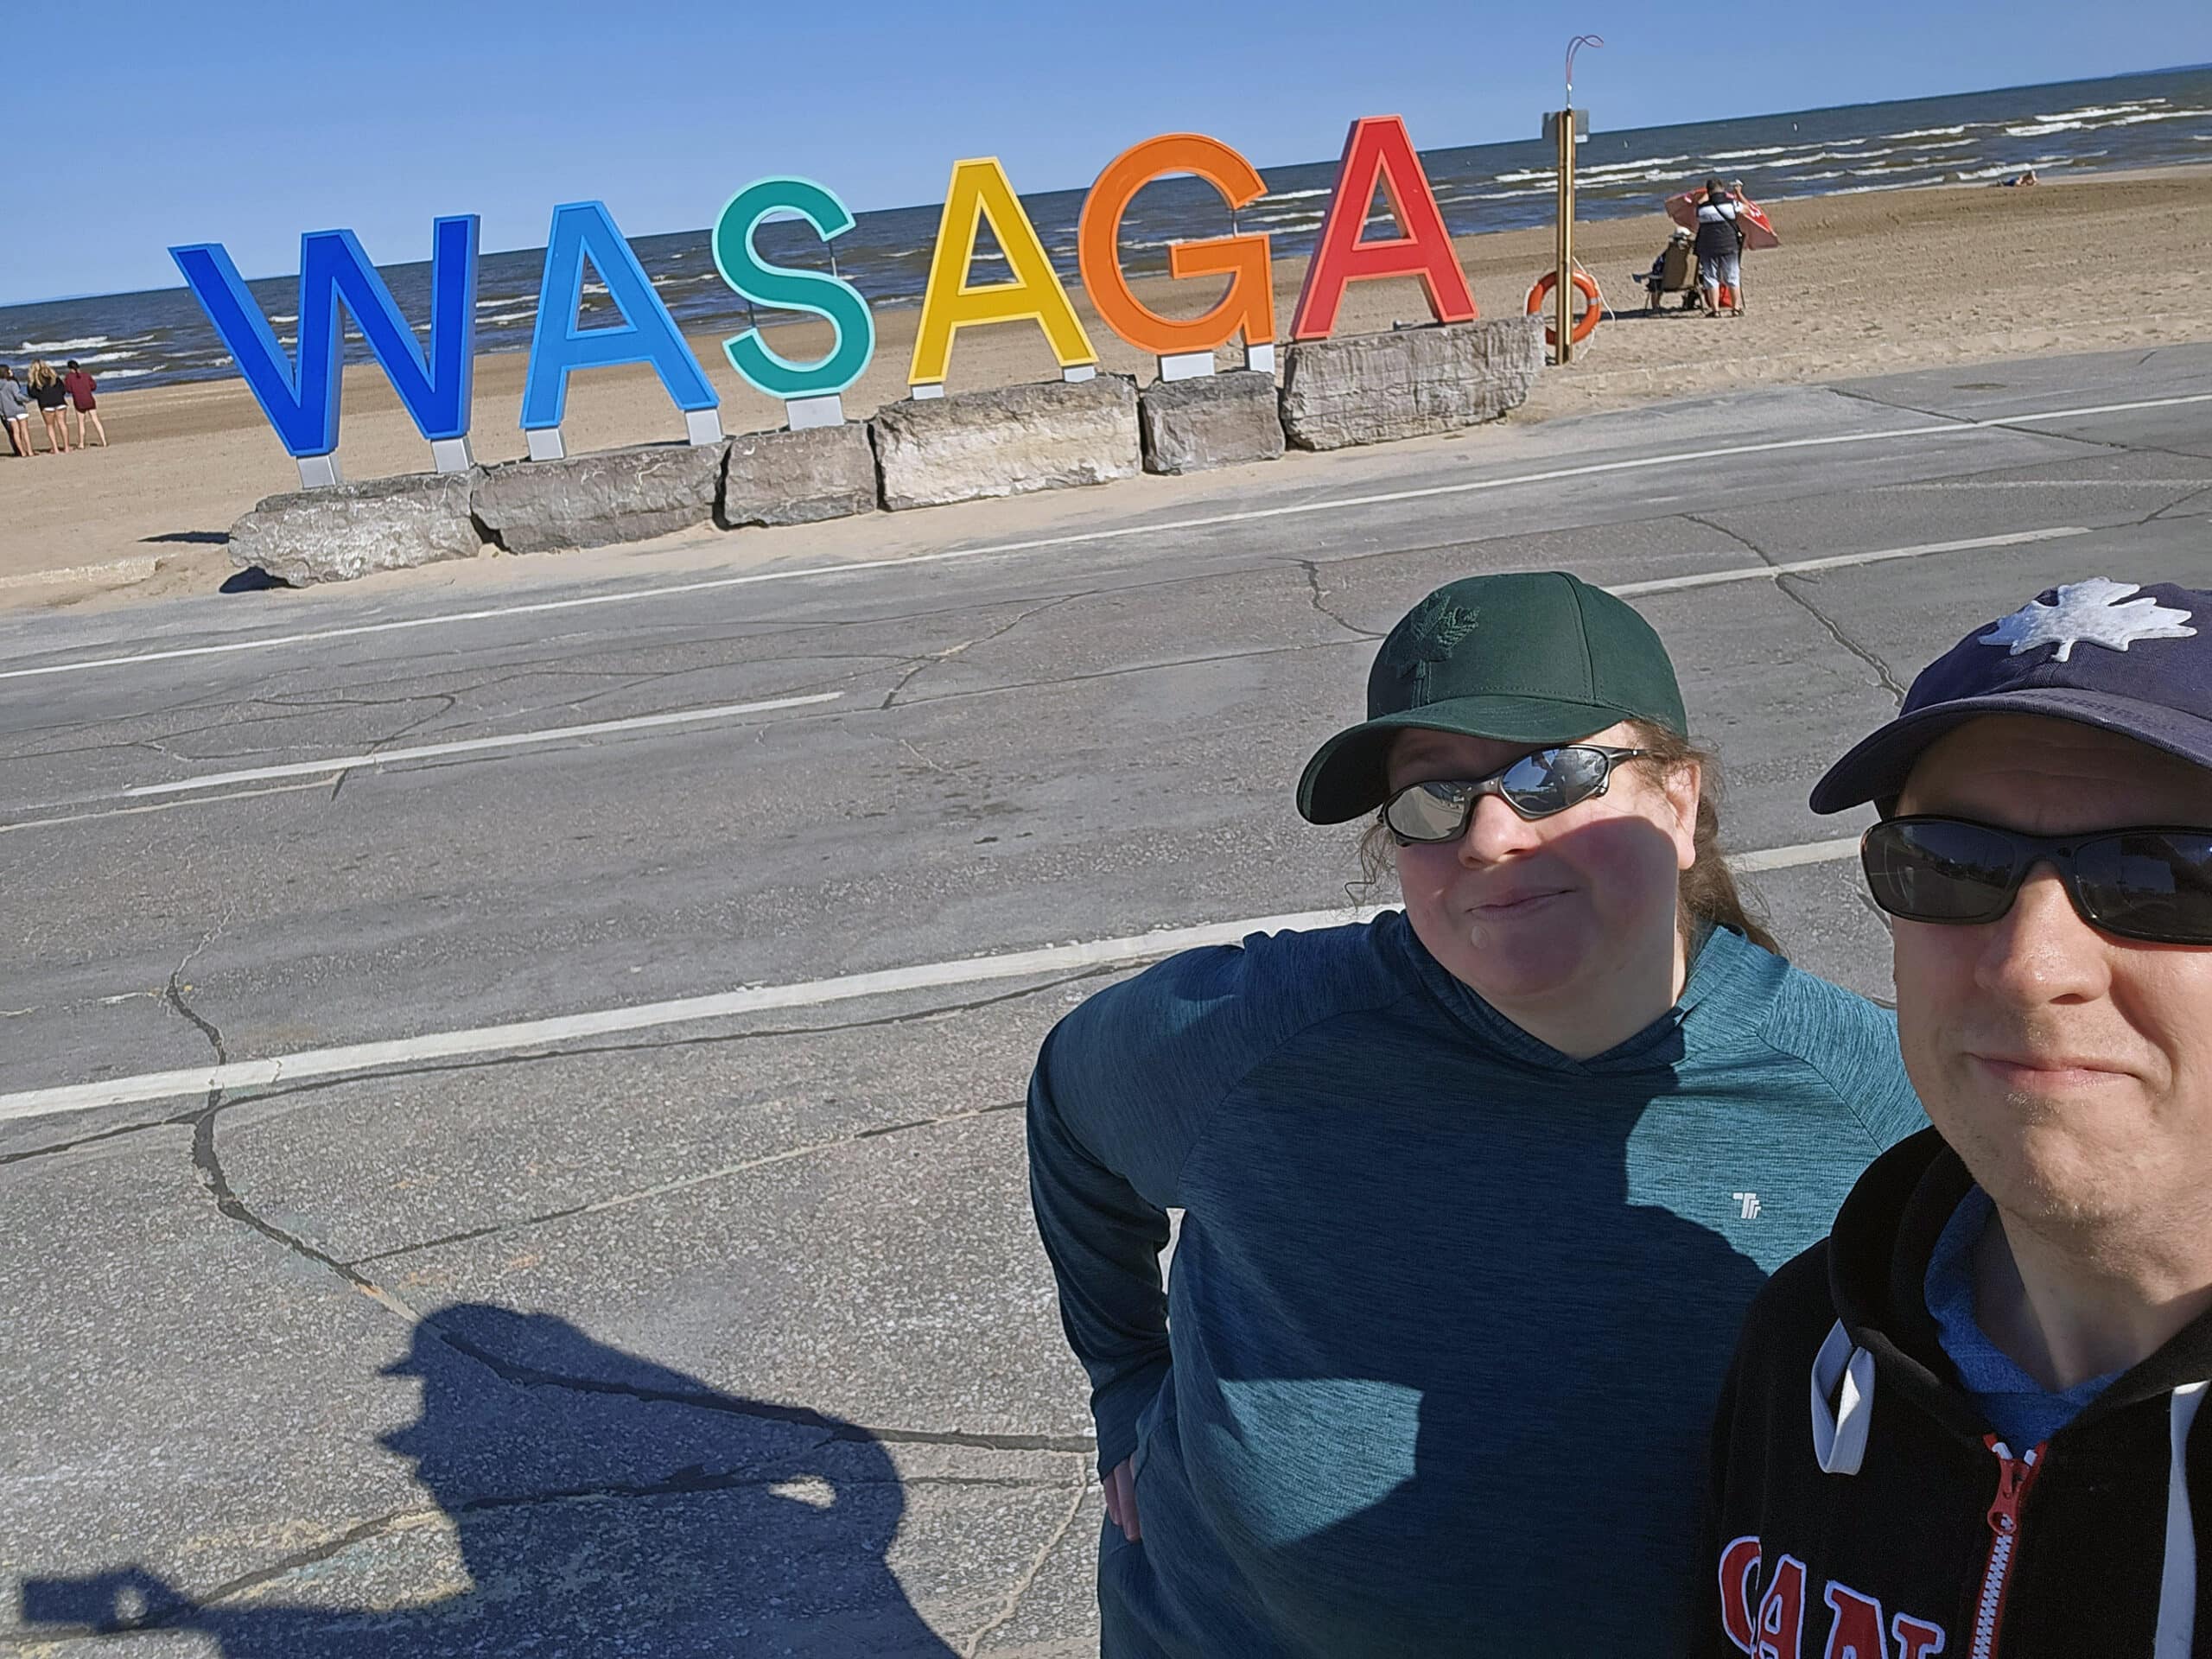 Rainbow letters spelling out wasaga, with the authors taking a selfie in front of it.